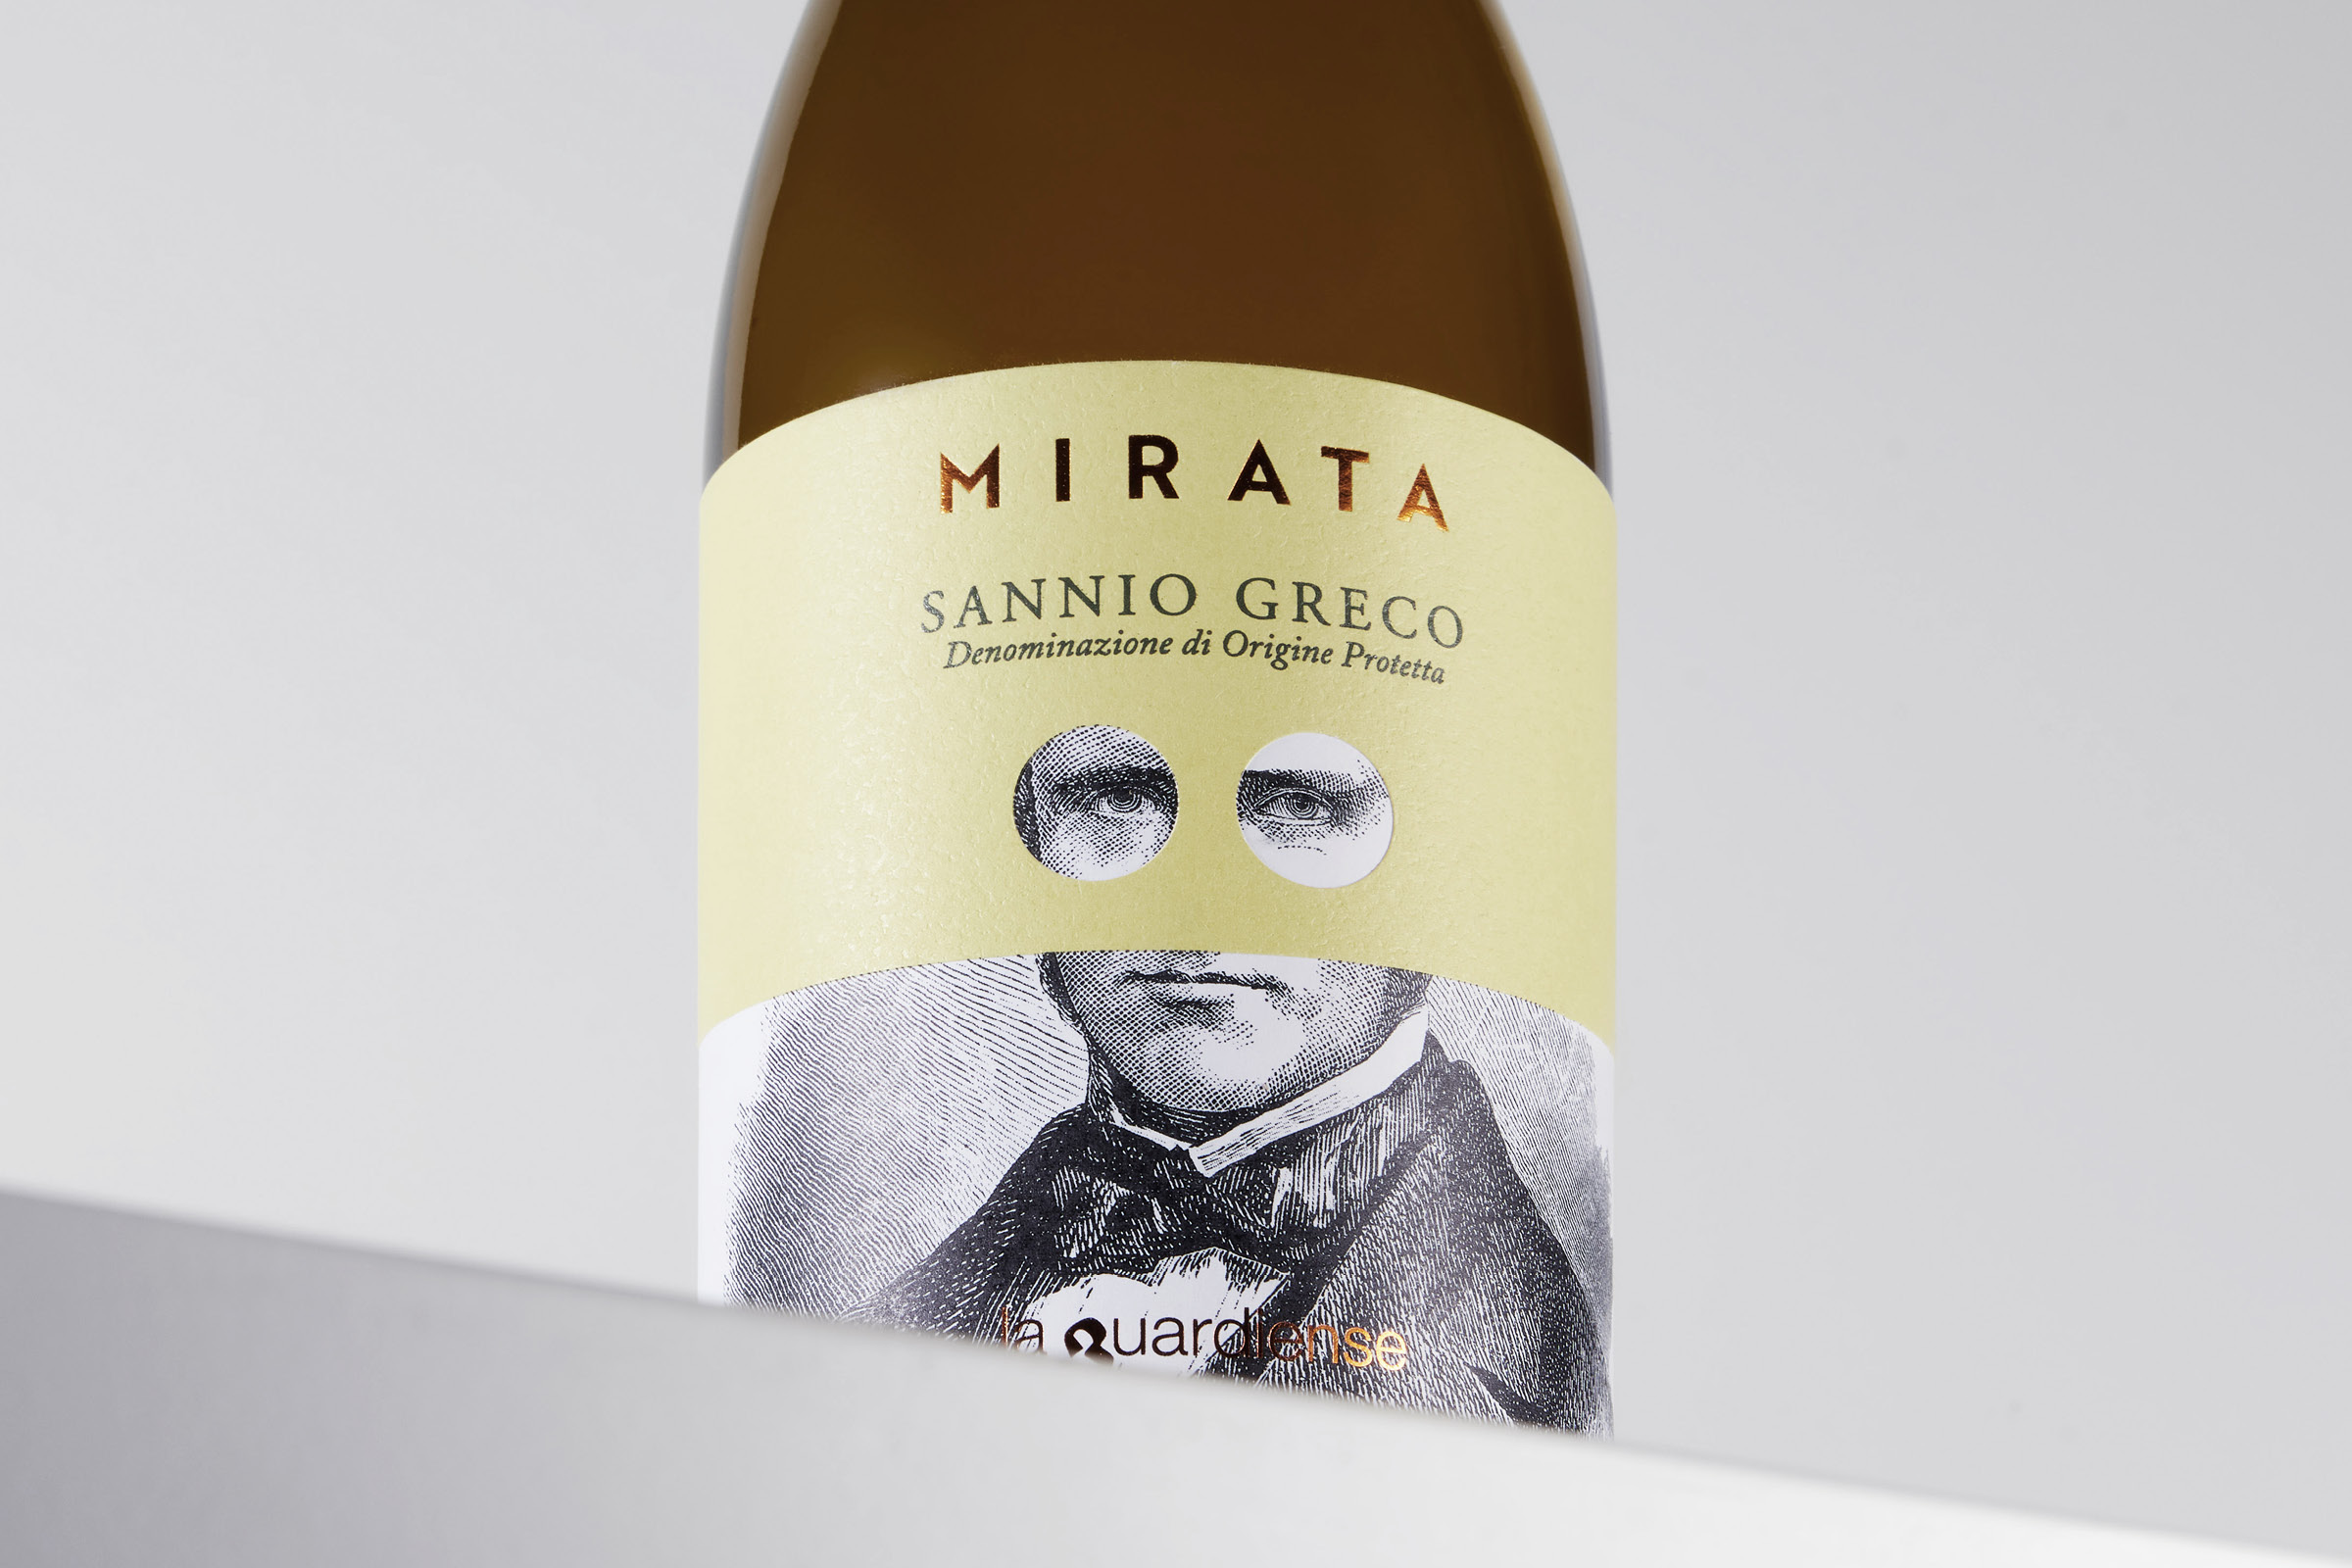 Discovering Mirata Wines: A New Wine Packaging Design